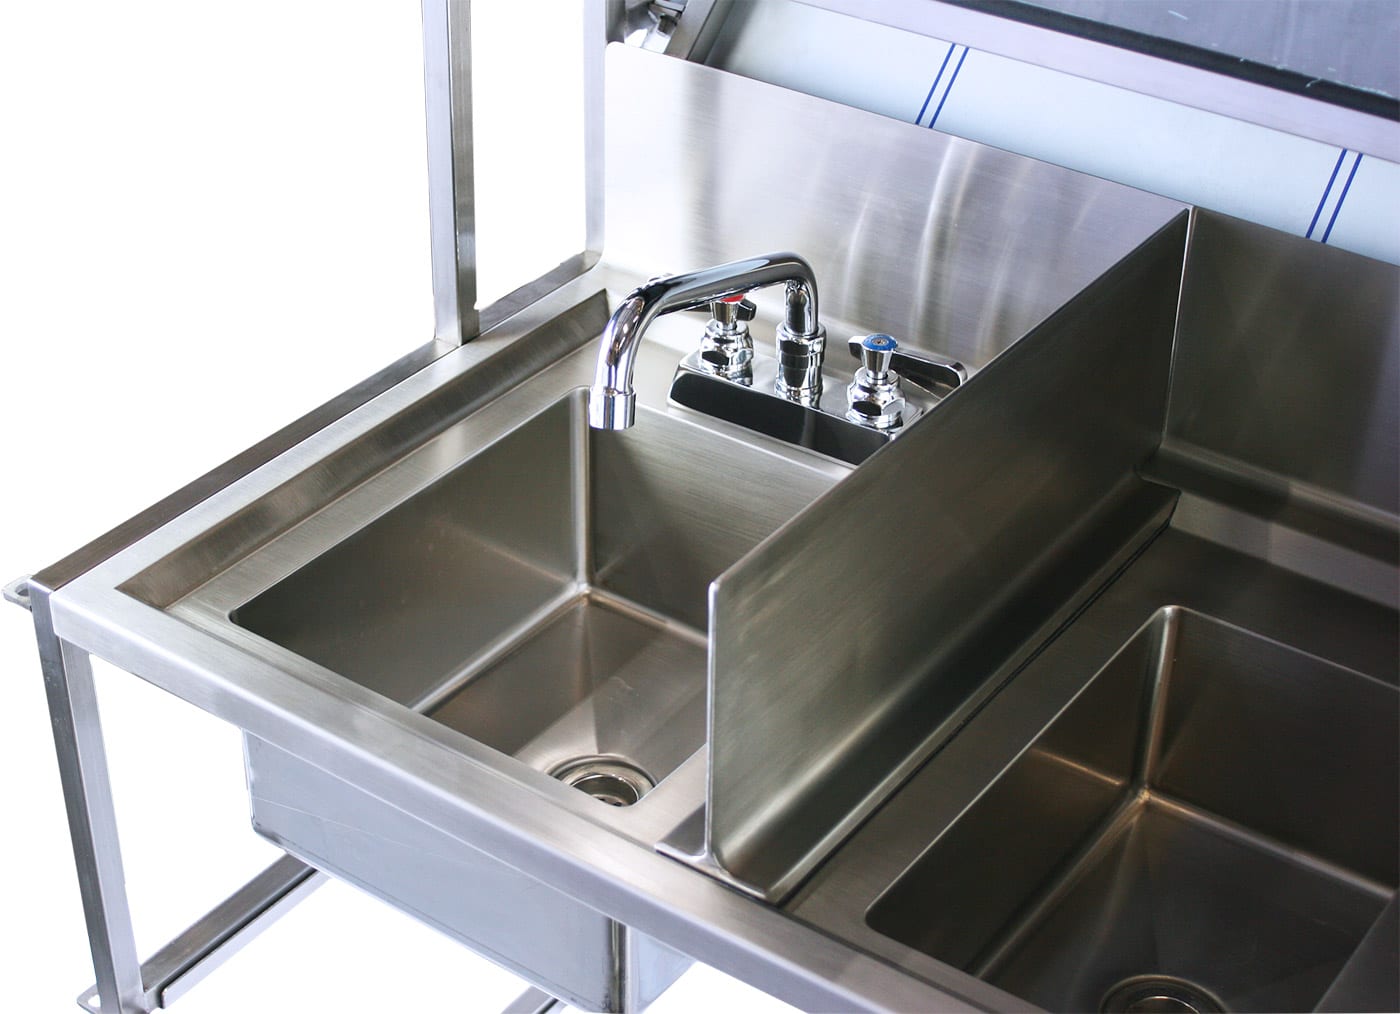 Full Self Contained 4 Basin Sink System